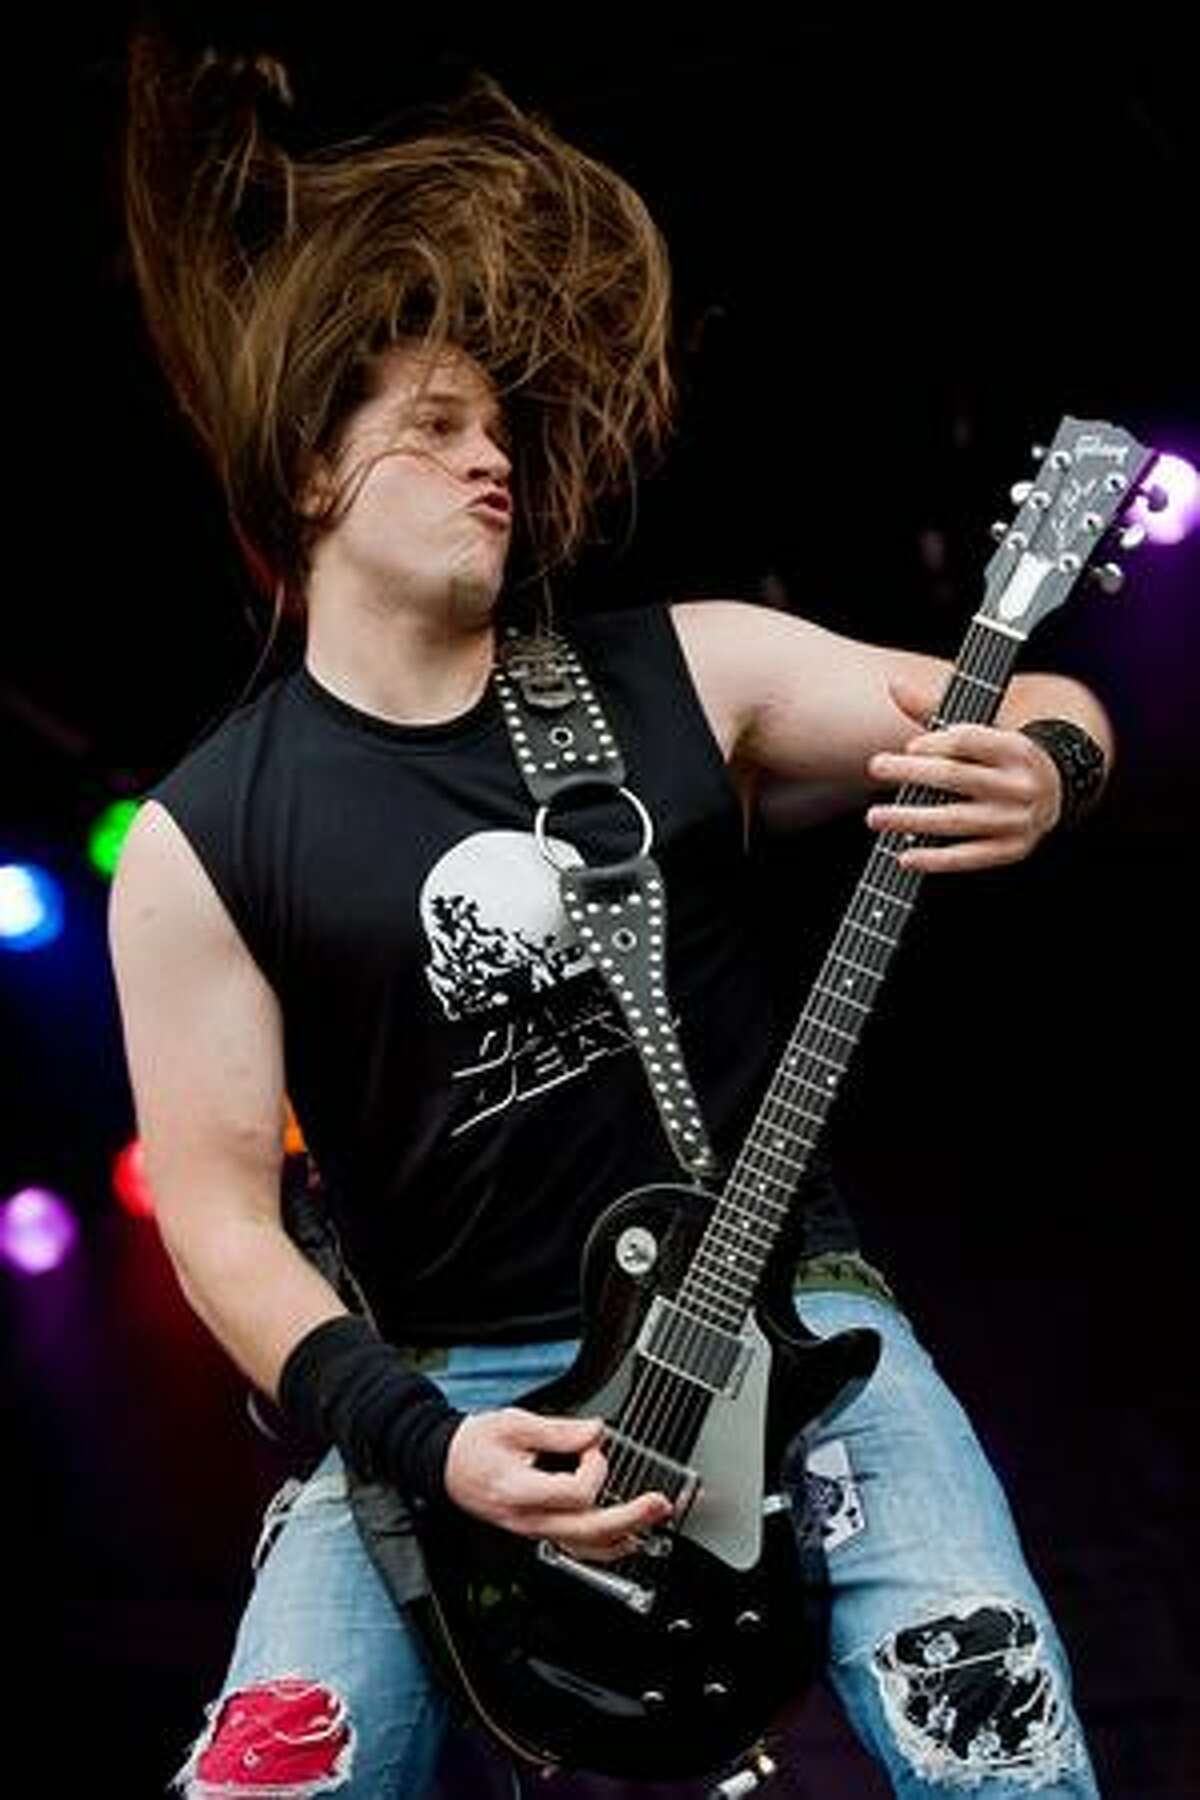 Adam Zadel of US metal group Soil performs on the Saturn stage at the Sonisphere rock festival at Knebworth, UK